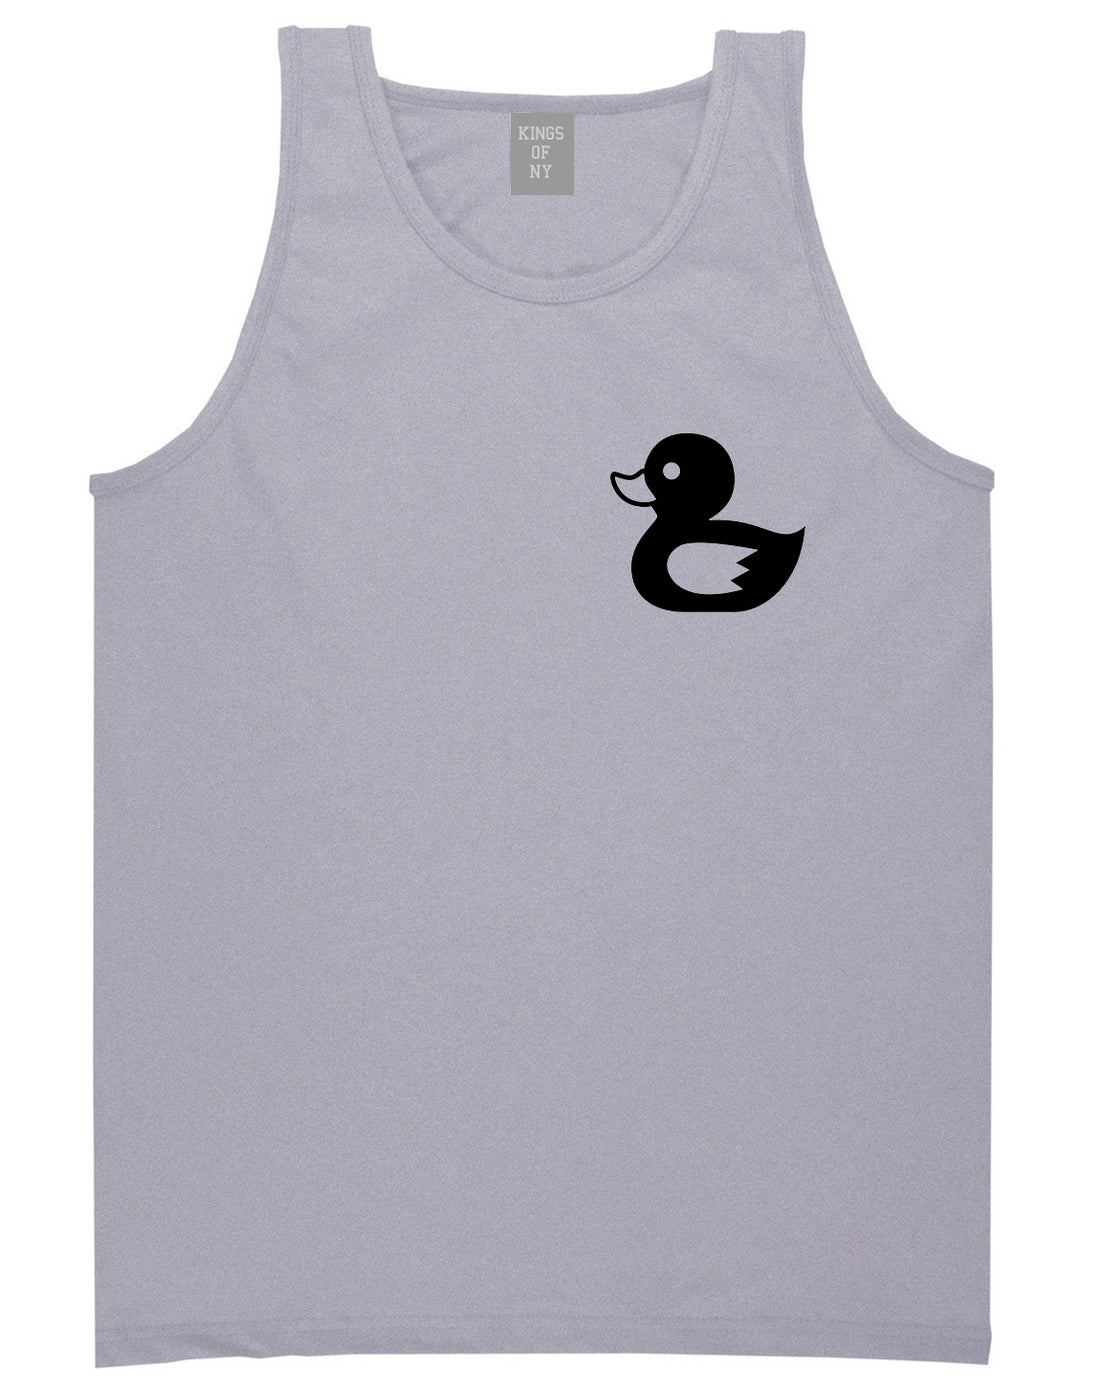 Rubber_Duck_Chest Mens Grey Tank Top Shirt by Kings Of NY